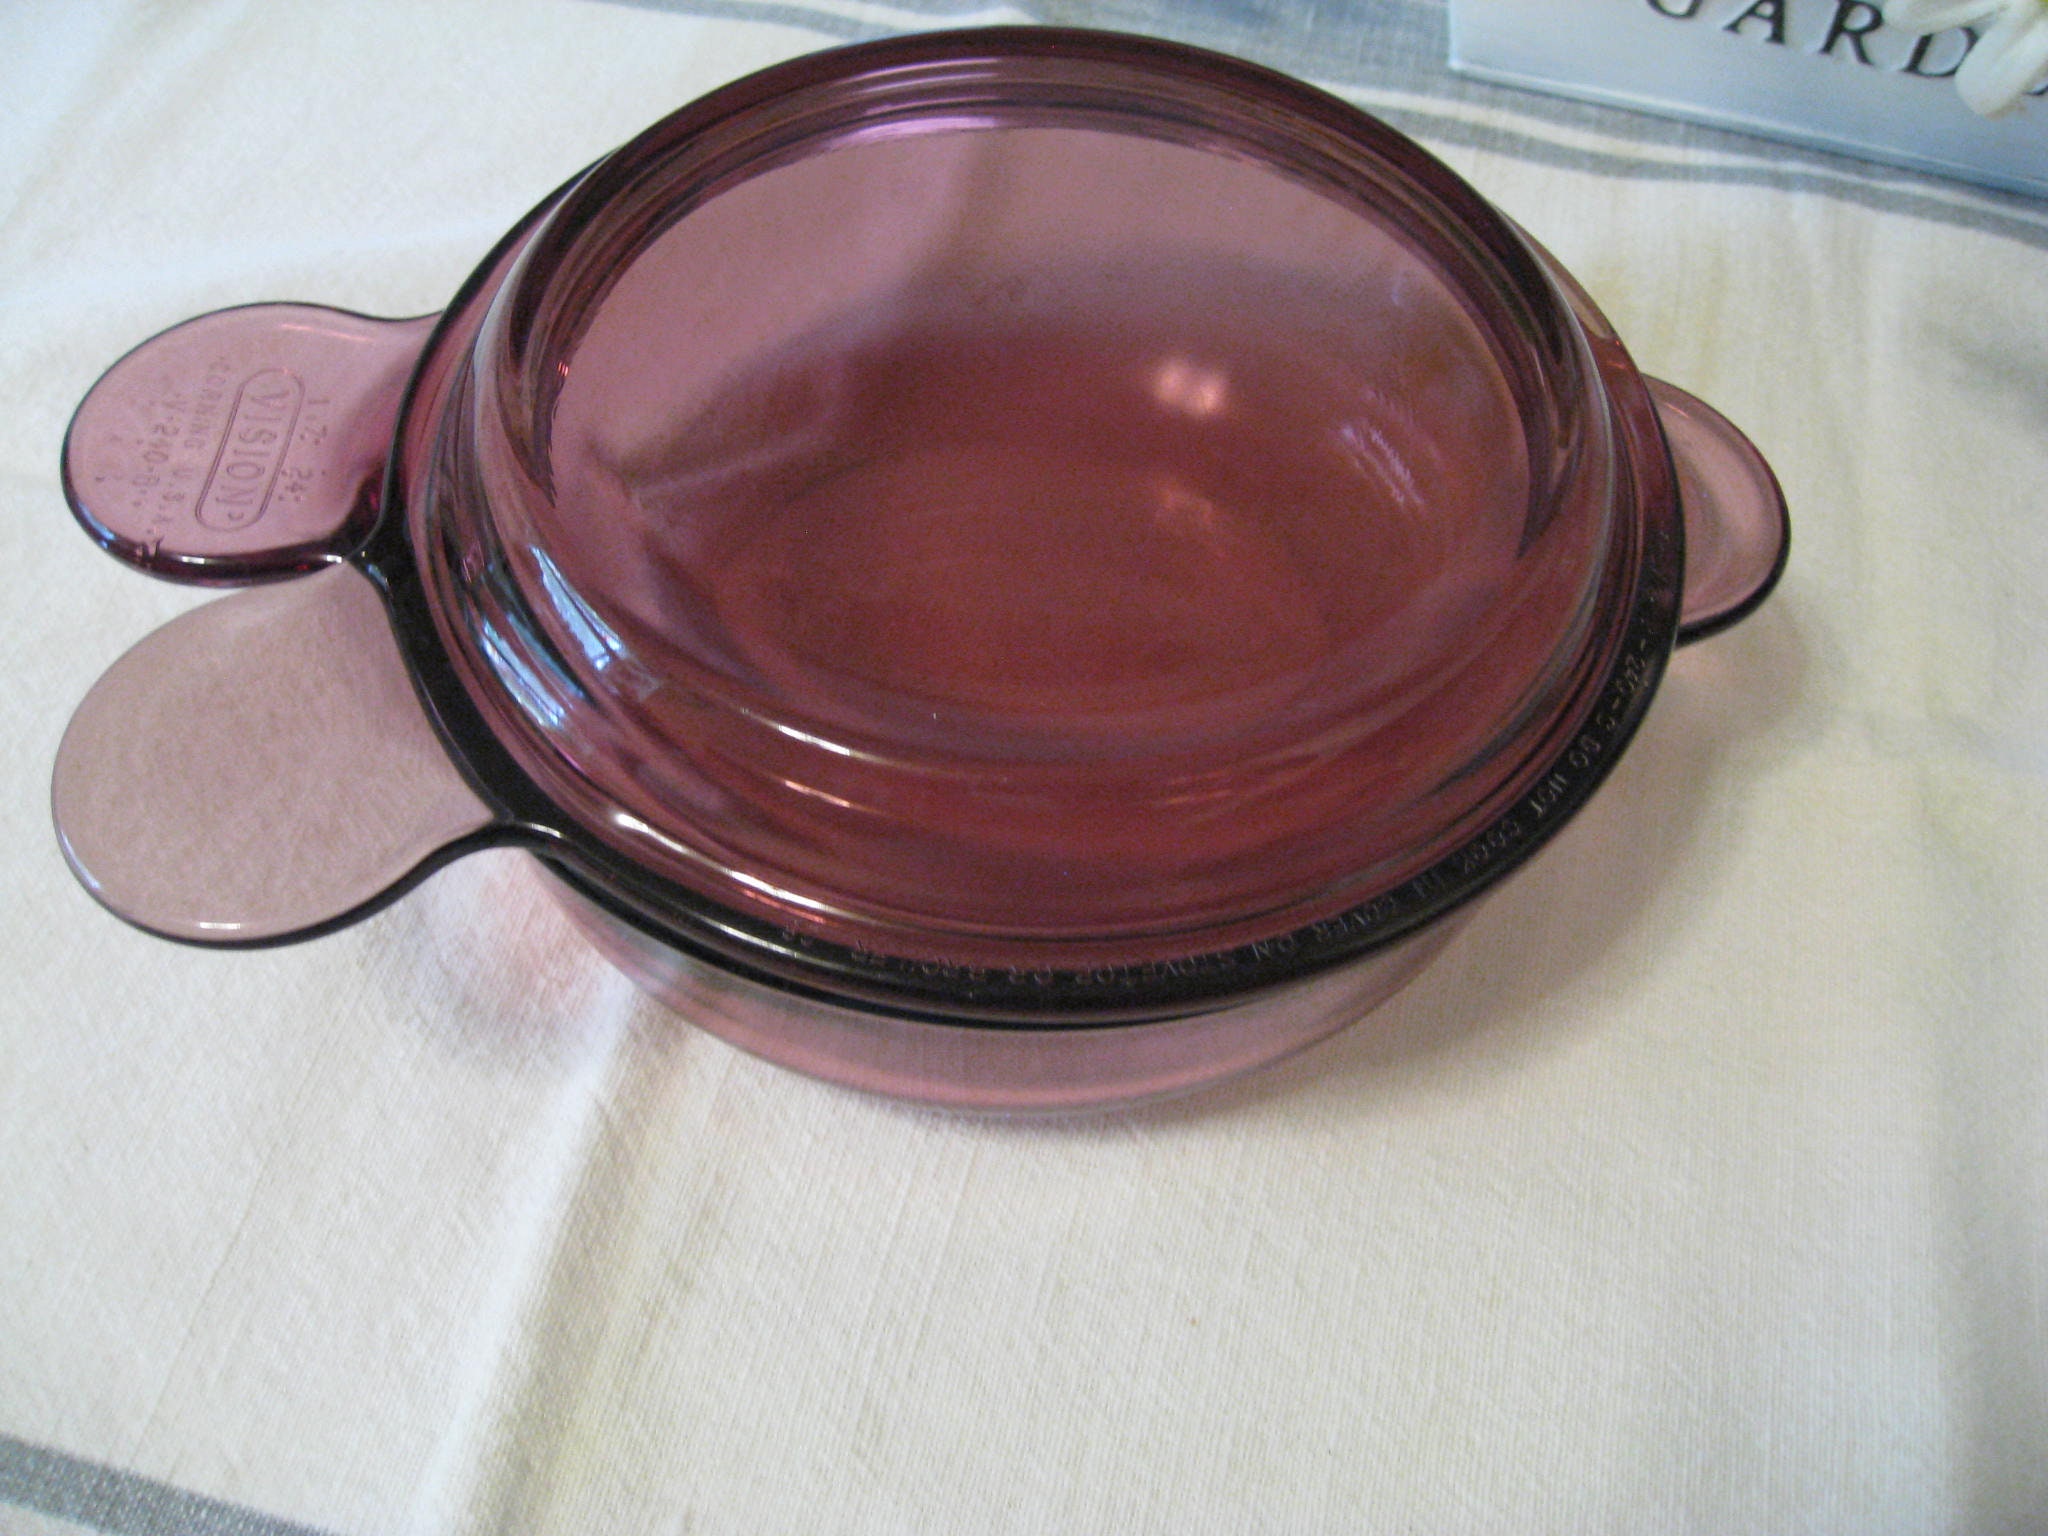 Vision Cranberry Casserole Corning Ware Bowl Dish With Lid, Ribbed Side and  Lip Edge-oven, Microwave, Range Top Vintage 